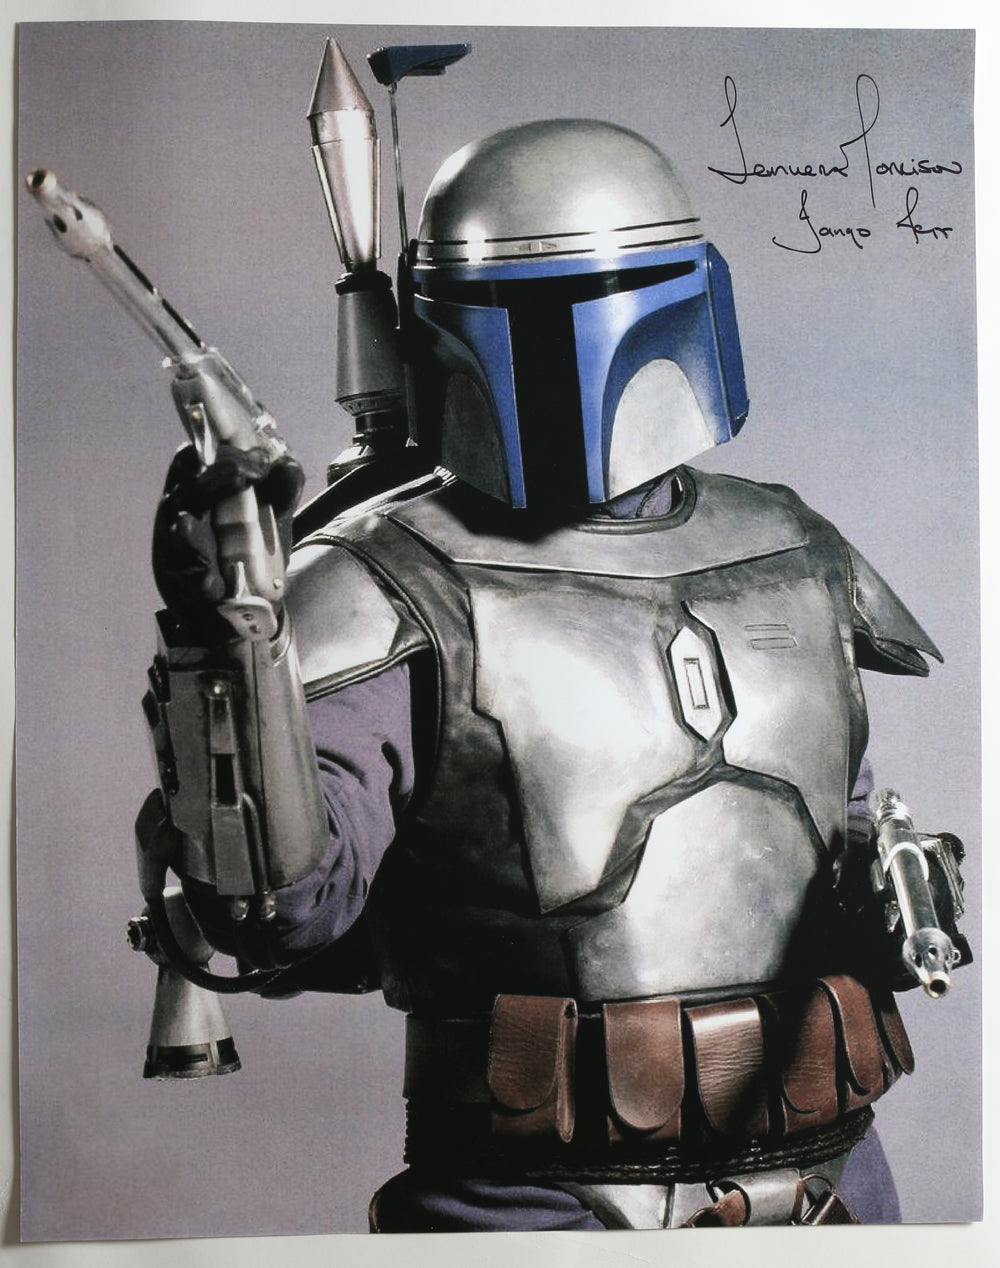 Temuera Morrison as Jango Fett in Star Wars Episode II: Attack of the Clones Signed 24x30 Poster with Character Name